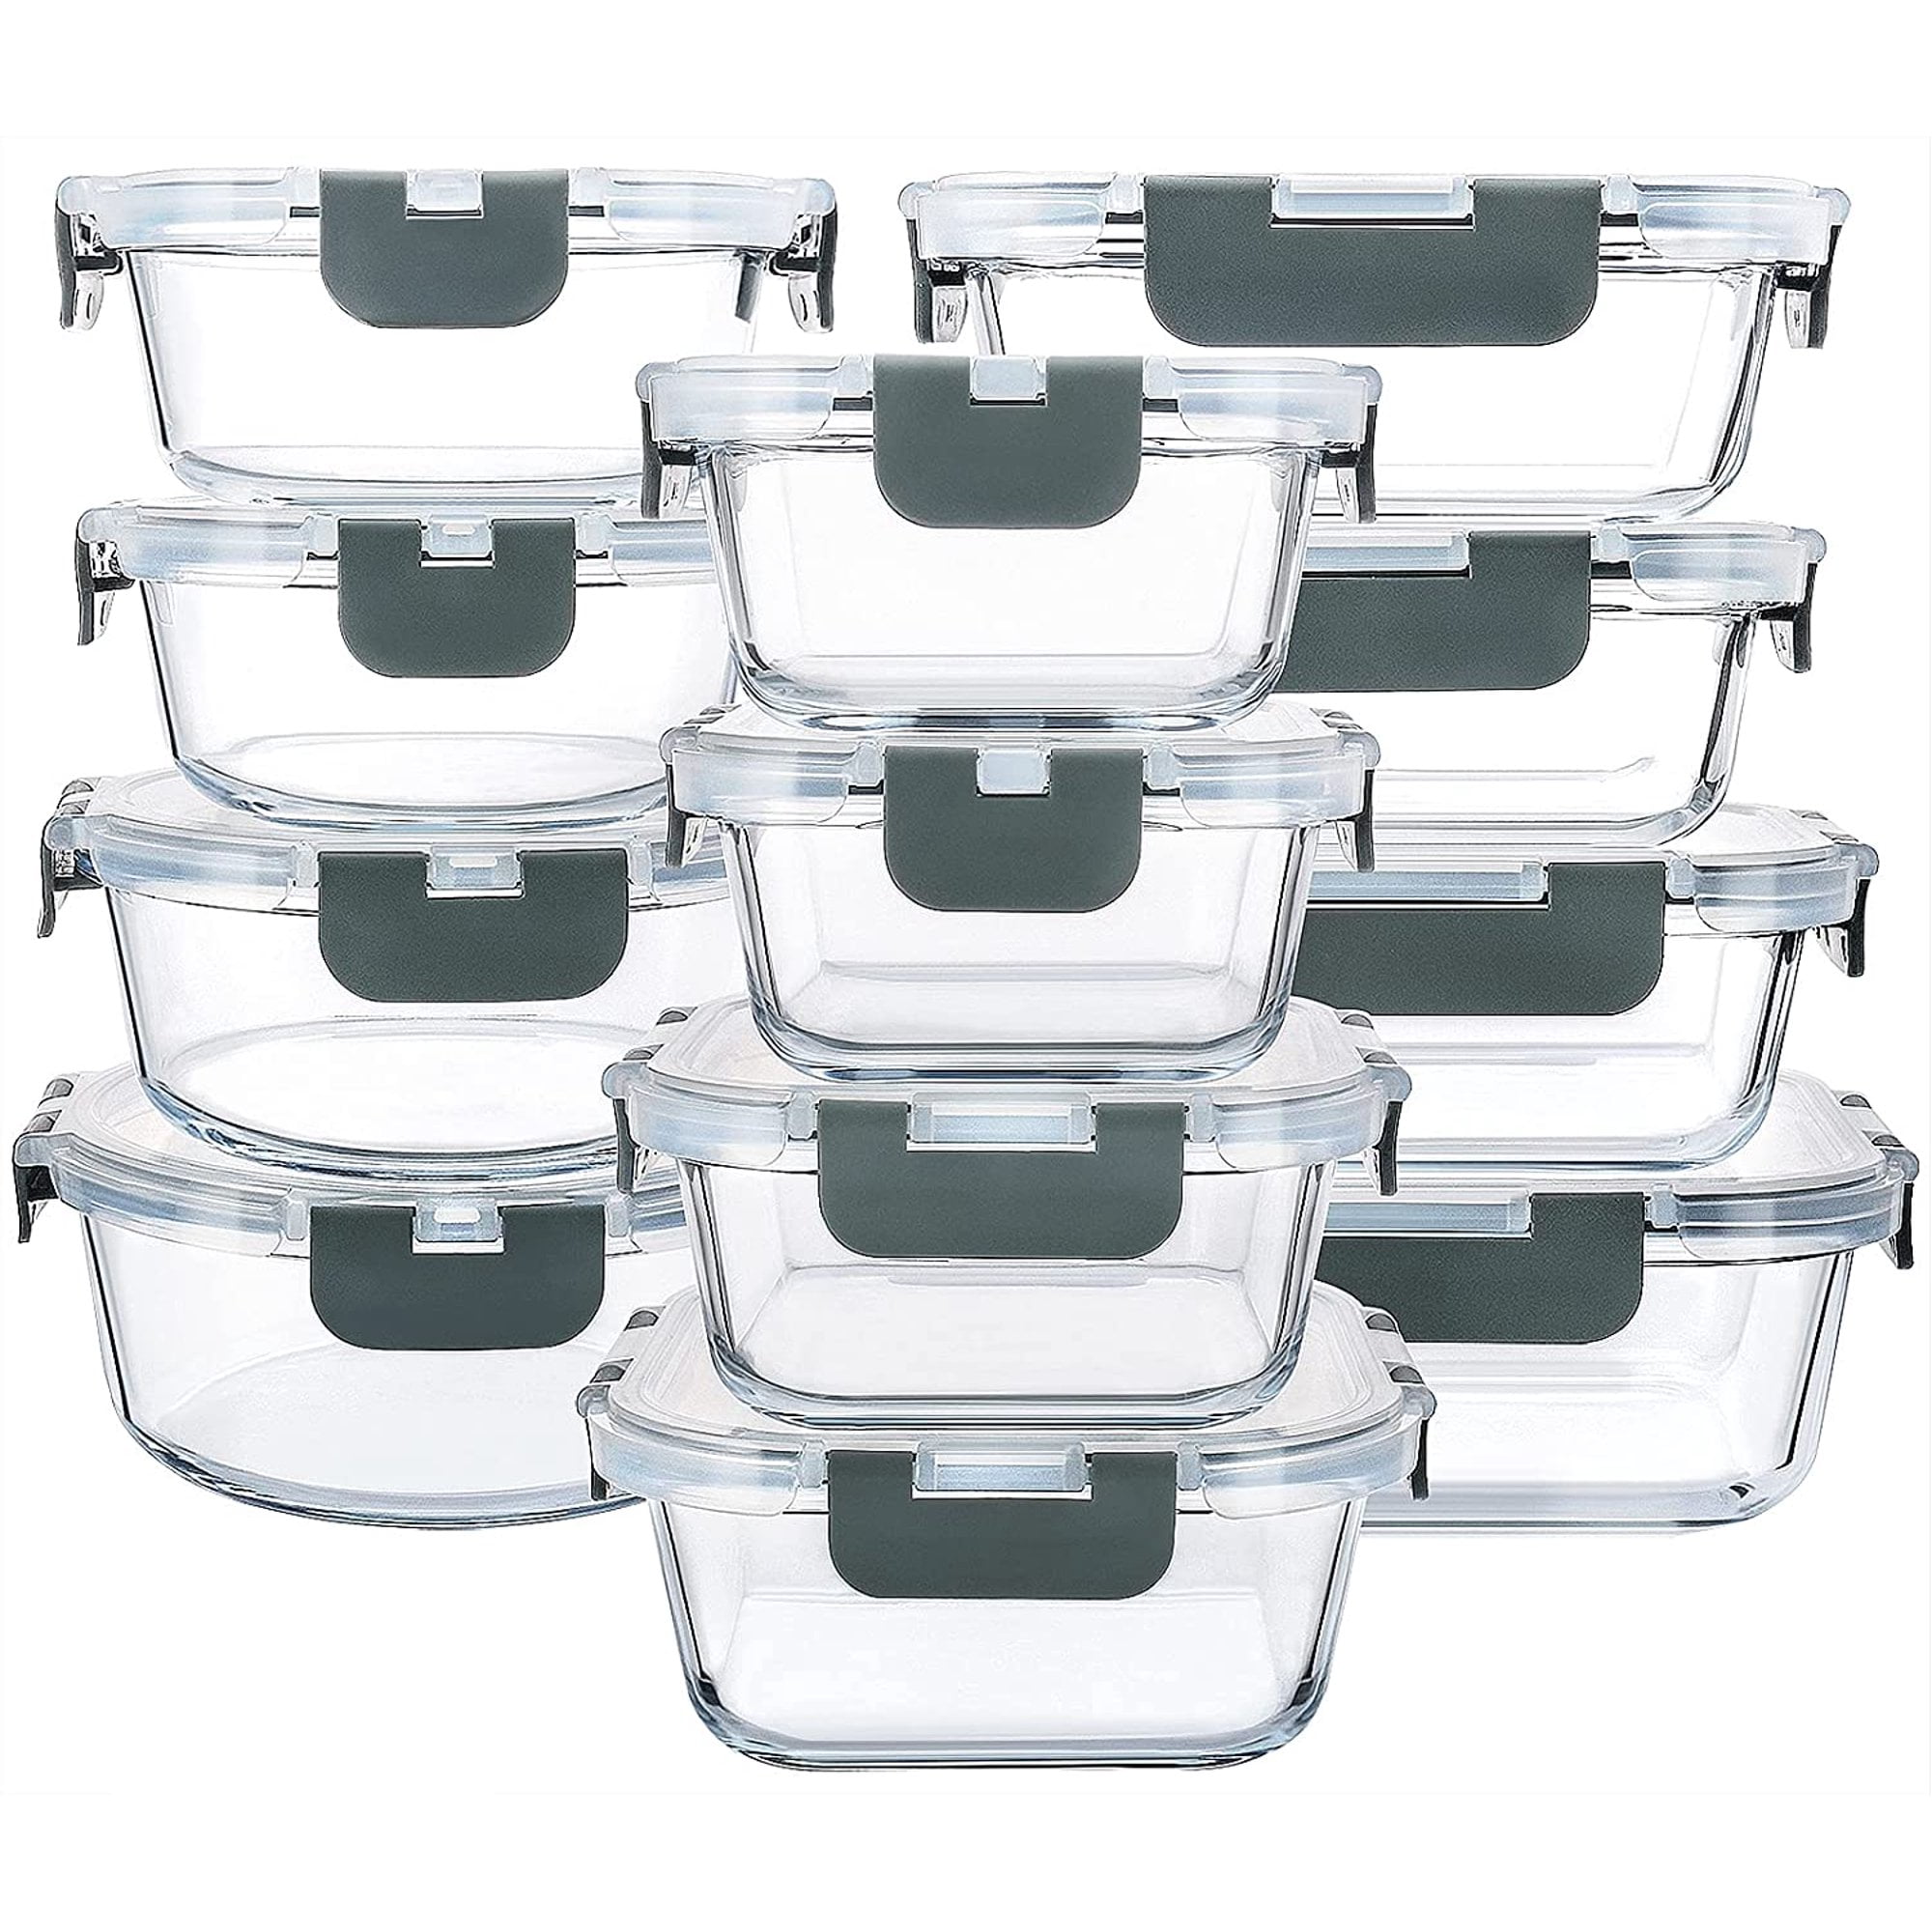 Mumutor Glass Food Storage Containers with Lids, 24 Piece] Glass Meal Prep Containers, Airtight Glass Bento Boxes, BPA Free & Leak Proof (12 Lids & 12